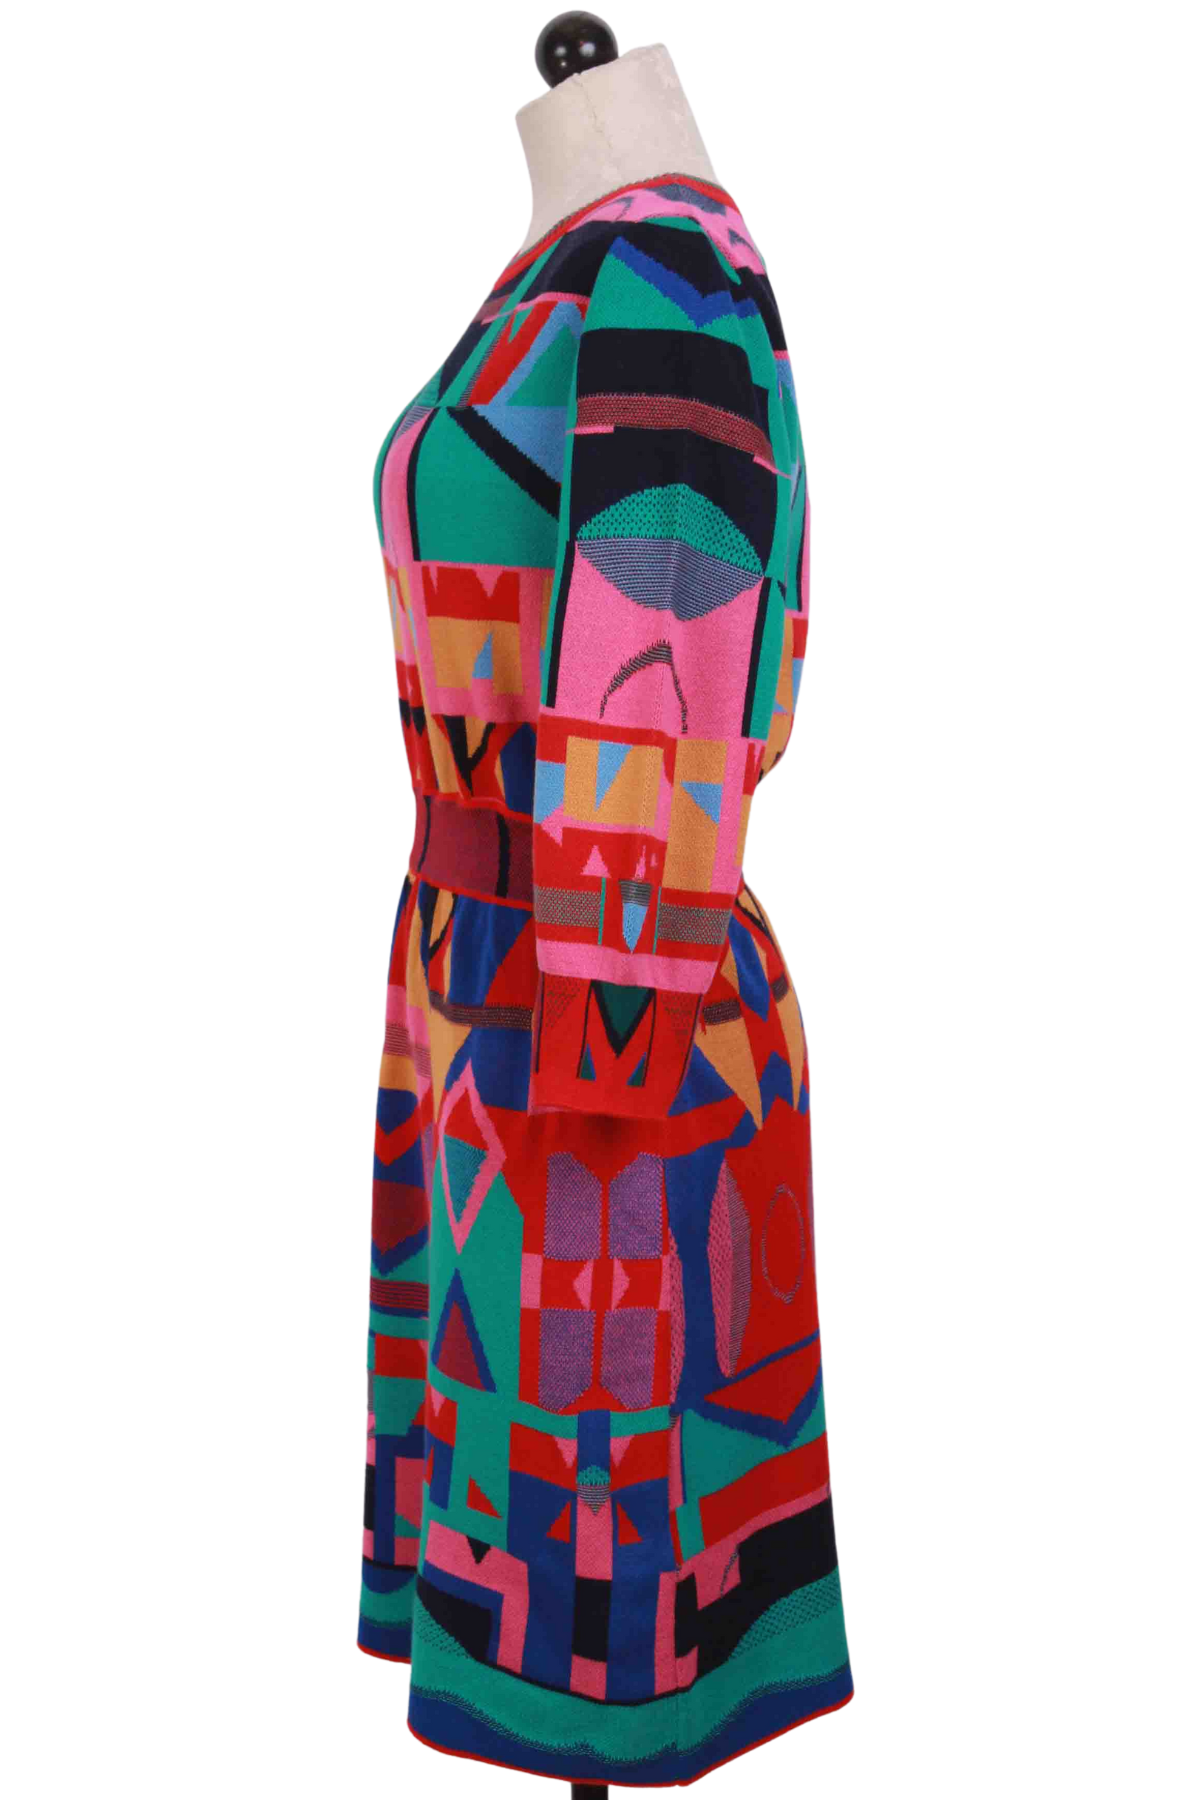 side view of Cherry Multi Abstract Pattern Dress by Ivko